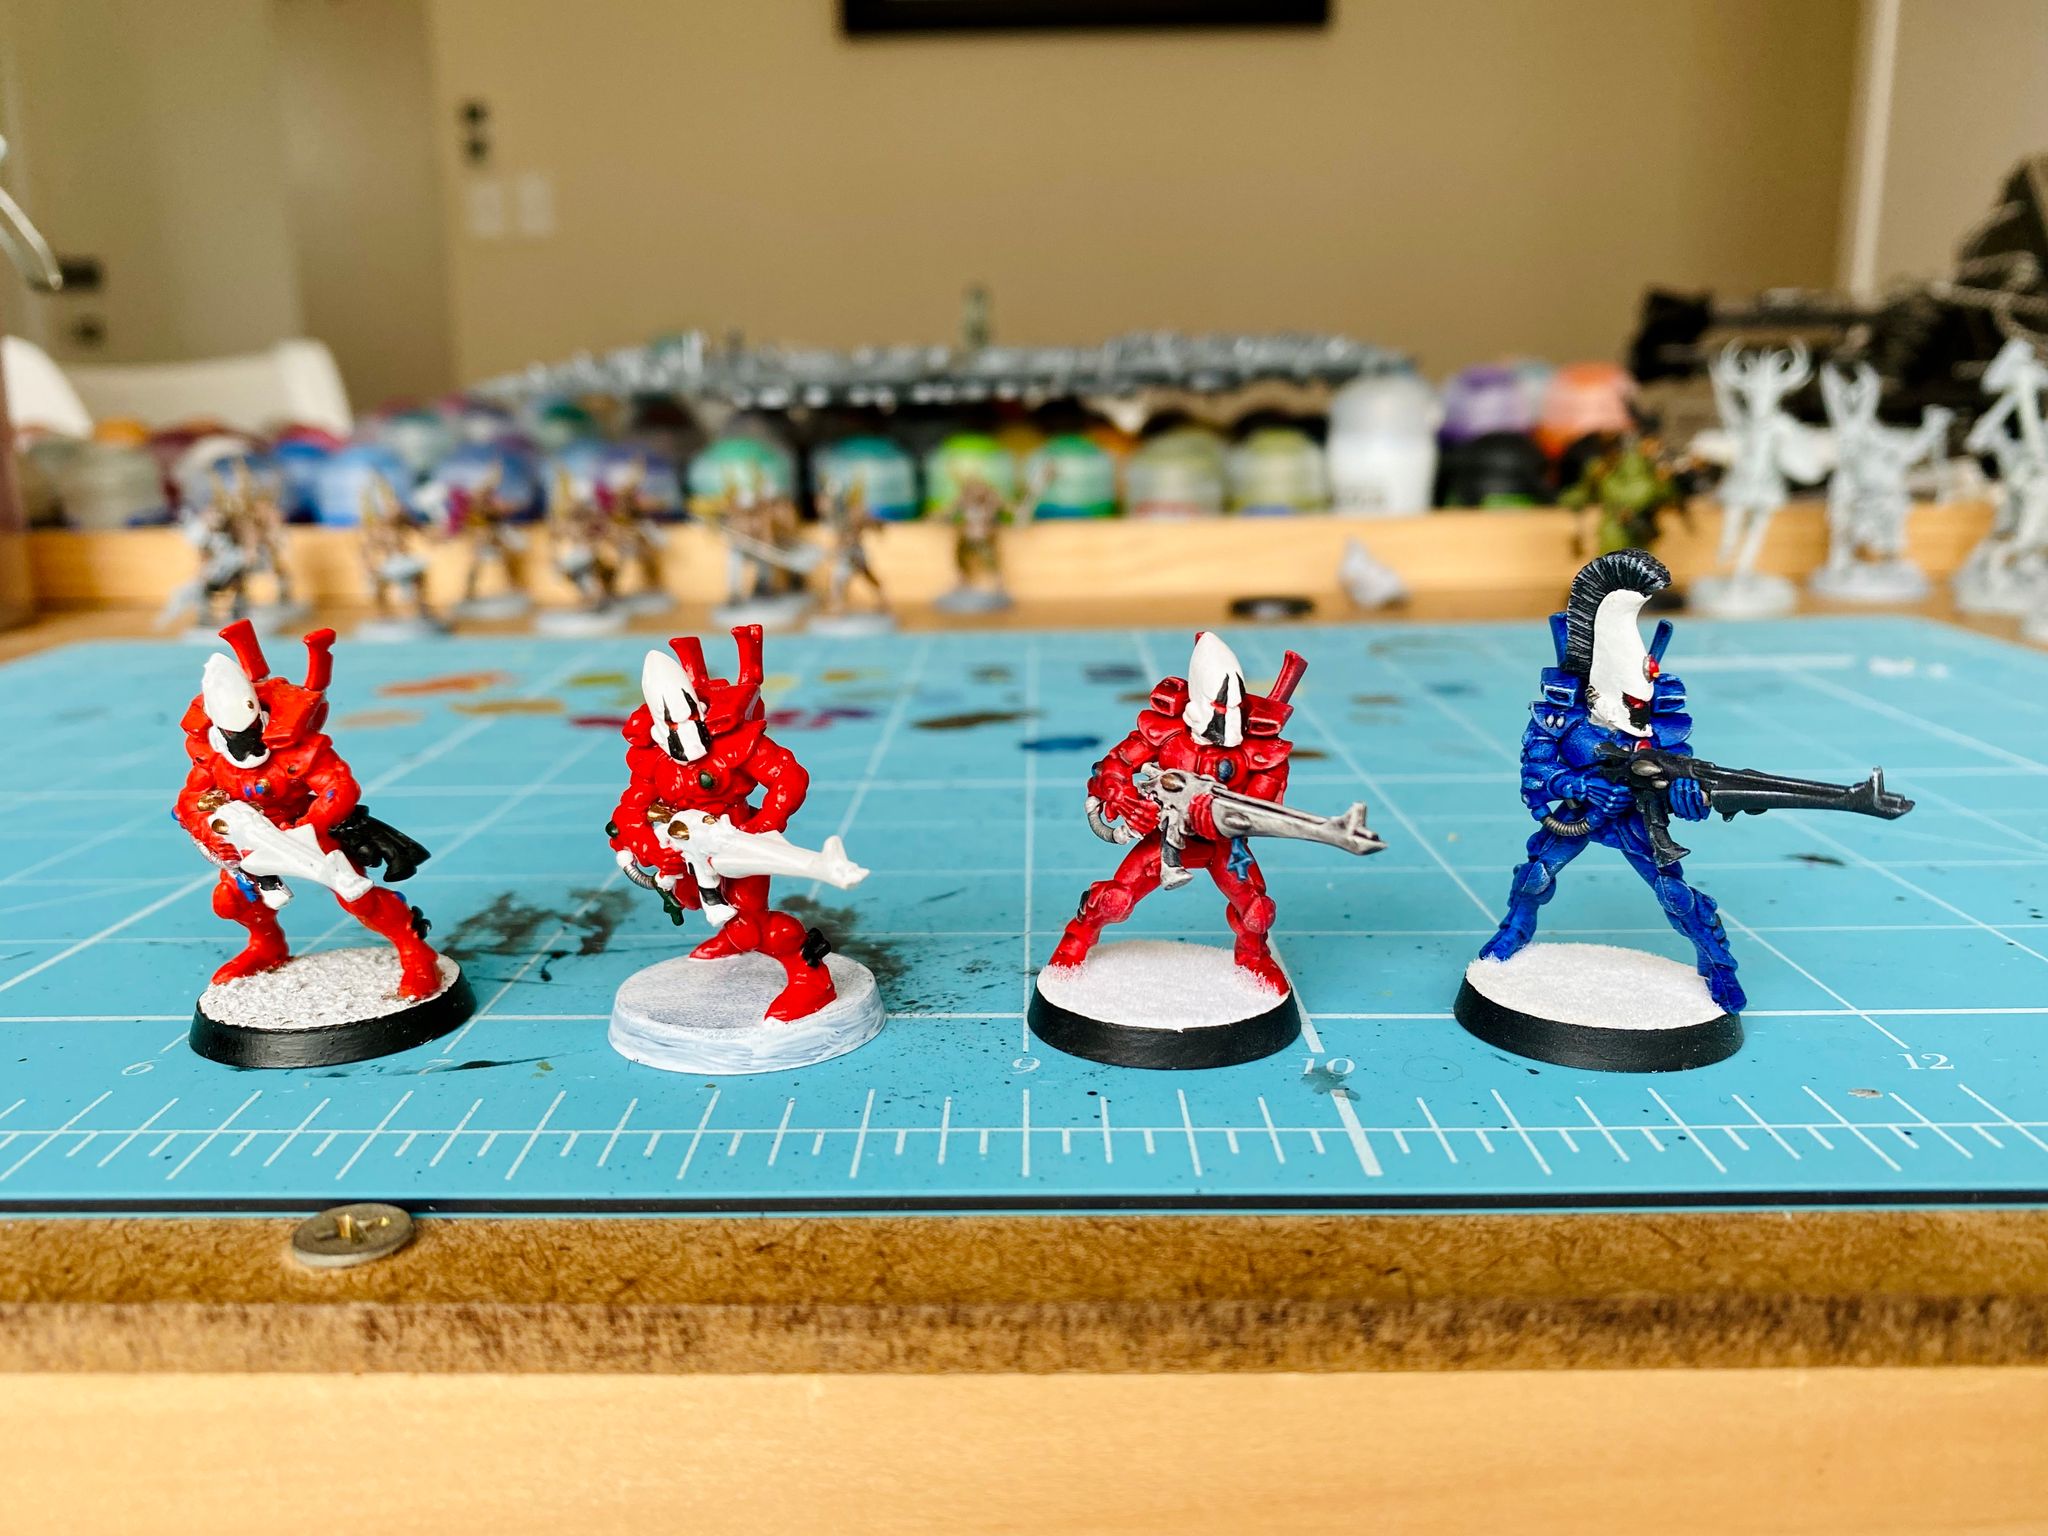 A photo of three Eldar Guardian miniatures and a Dire Avenger. The Guardians are painted red with white helmets, the left-most one has no washes or dry-brushing and is very plain. The next is richer red but still no proper washes or drybrushing. Next is one I improved by adding Contrast paint and a drybrush, and the Dire Avenger is painted rich dark blue with nice drybrushing and highlights.